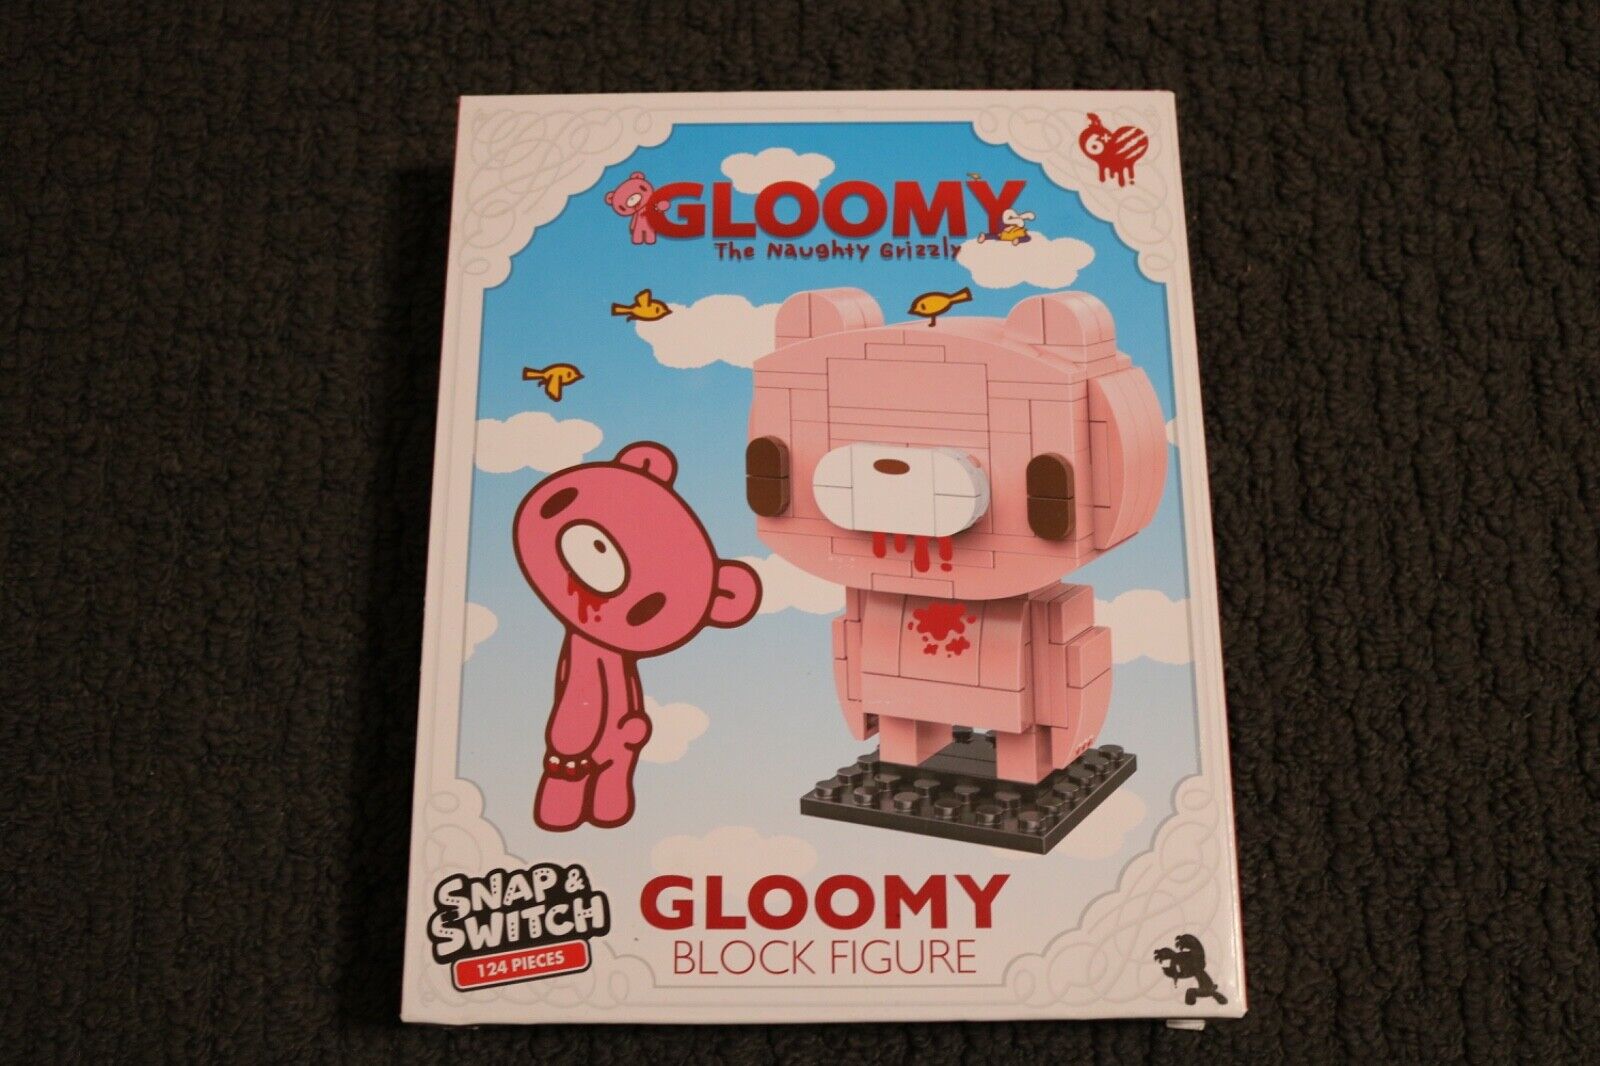 GLOOMY The Naughty Grizzly Snap & Switch 124 Pieces Gloomy Block Figure New